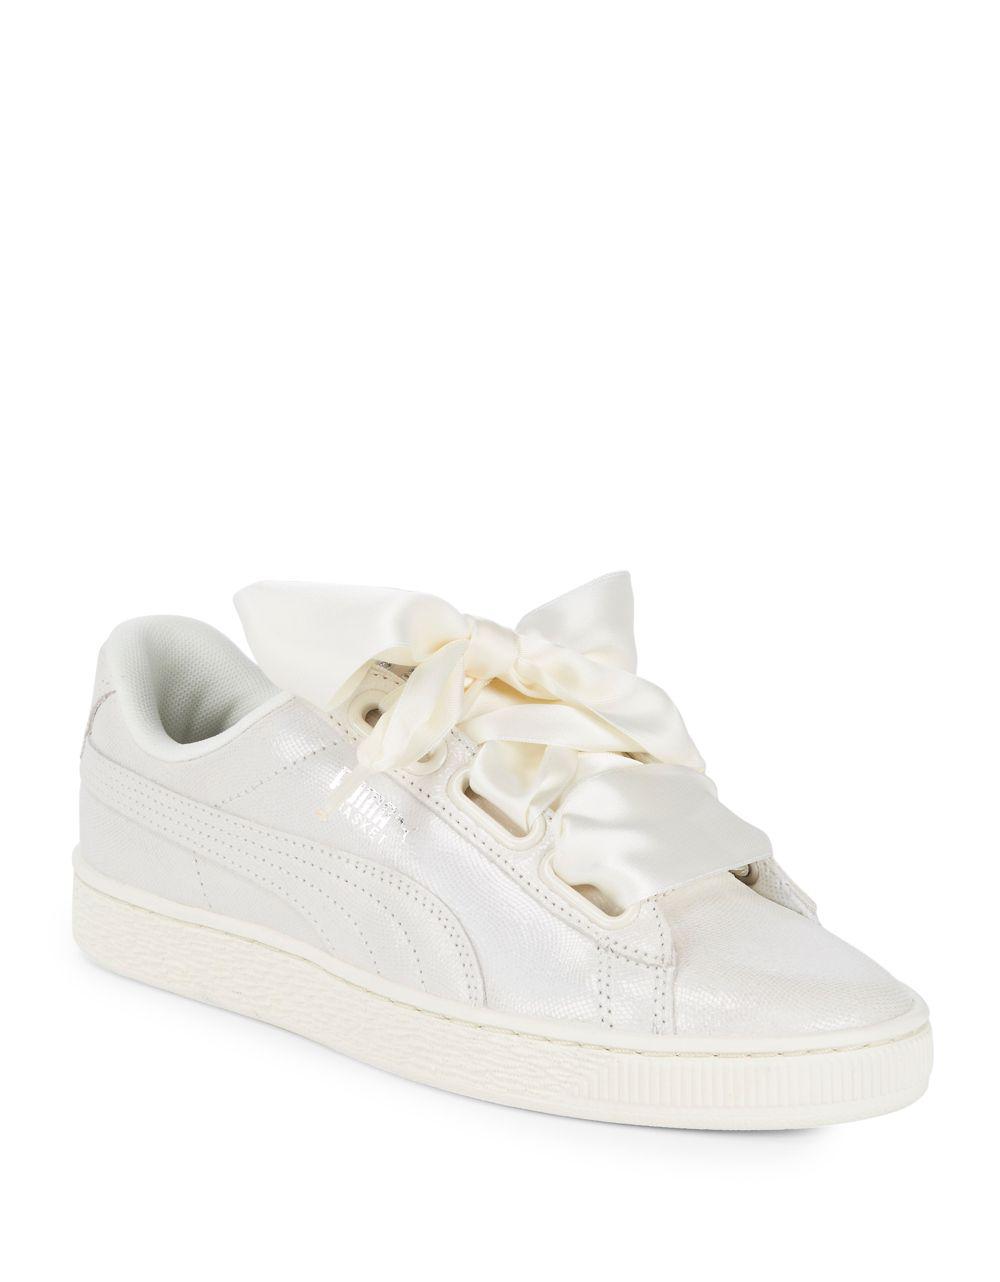 puma white shoes with ribbon laces